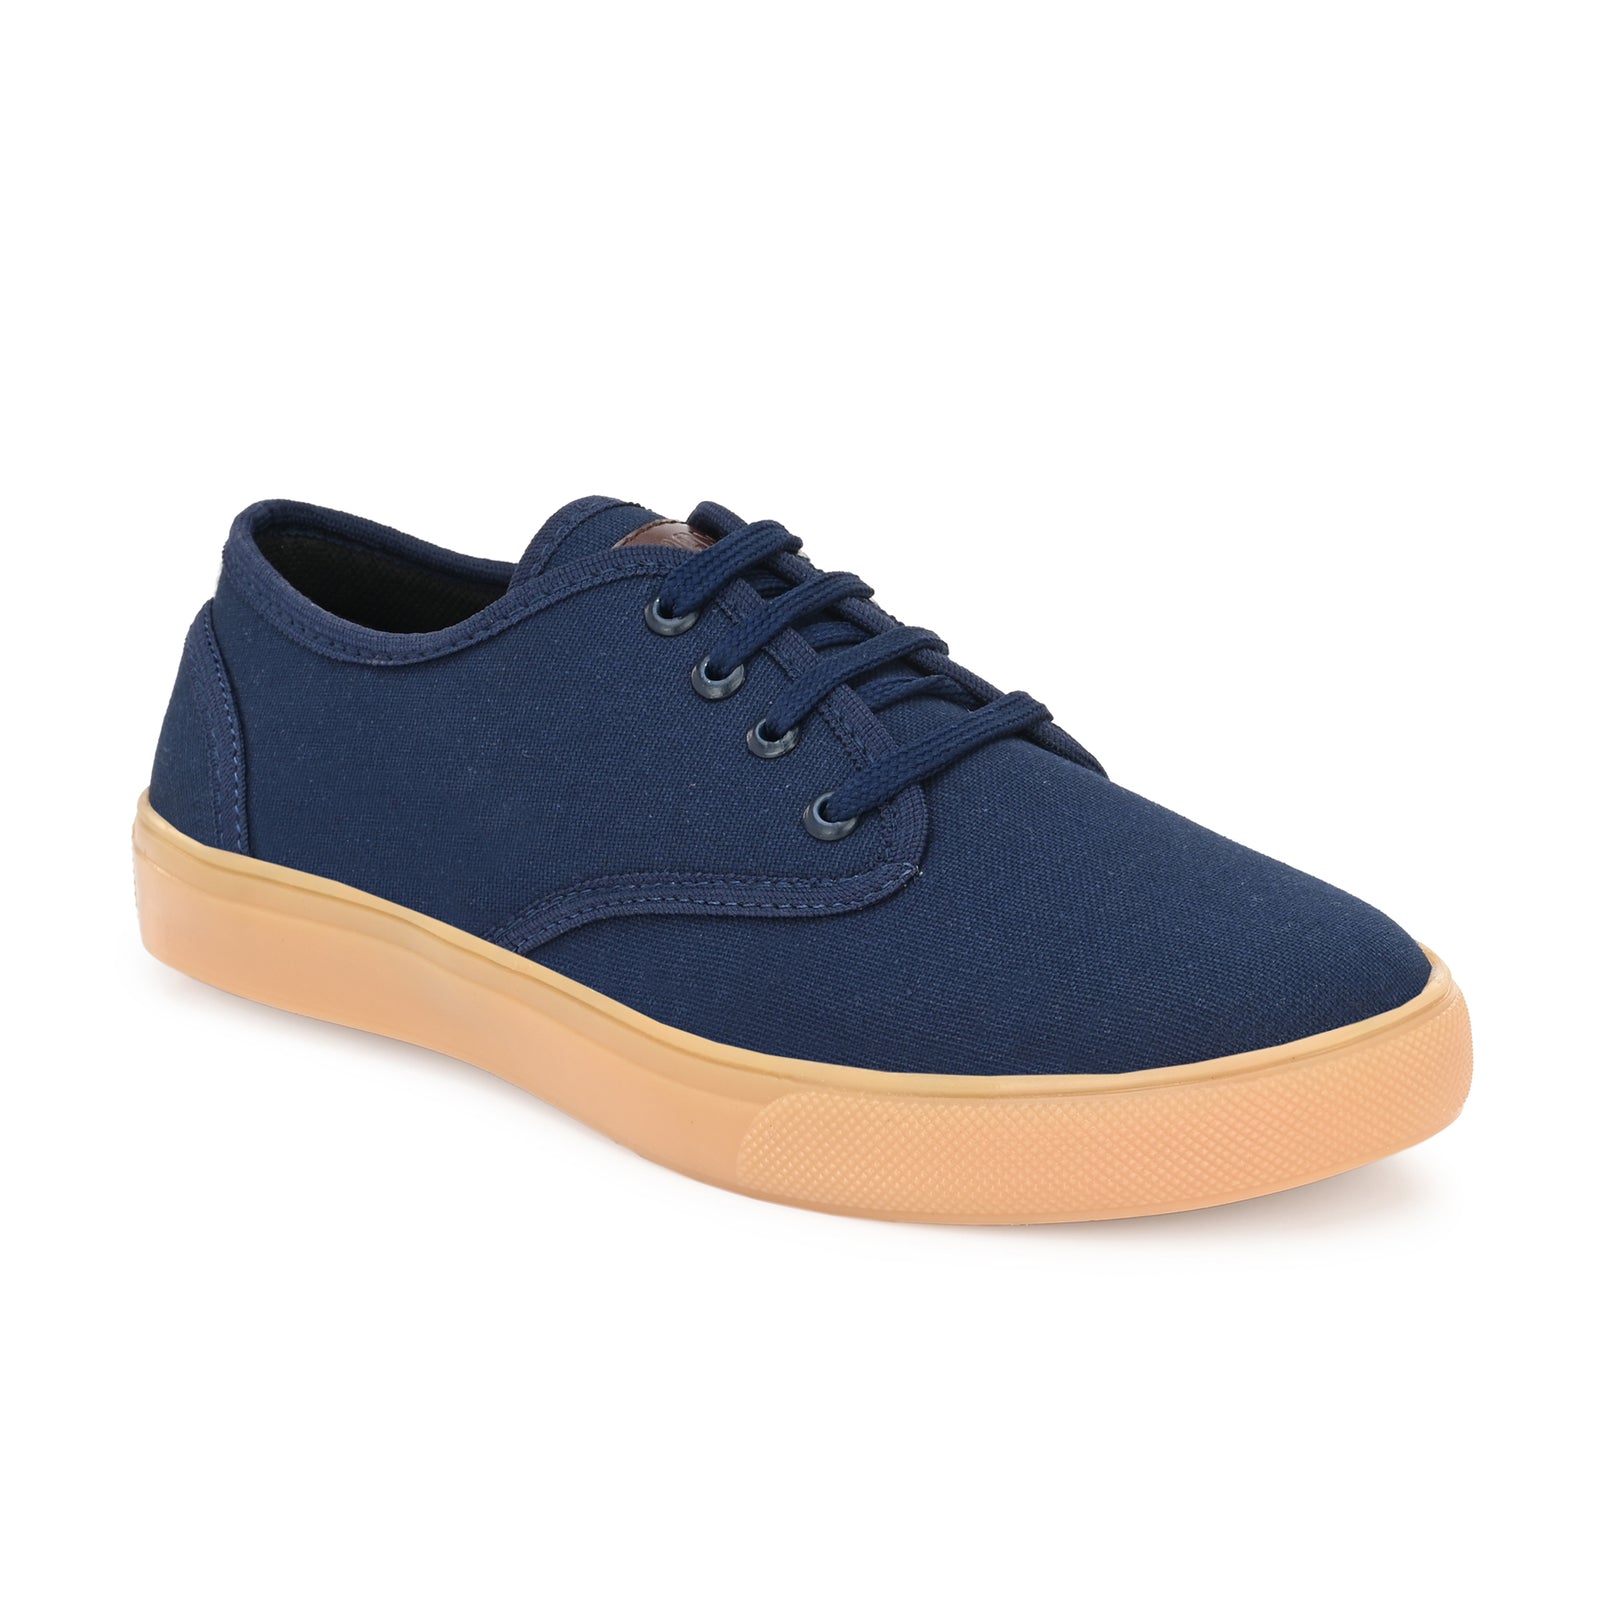 Navy Blue Solid Synthetic Leather Lace Up Lifestyle Casual Shoes For Men